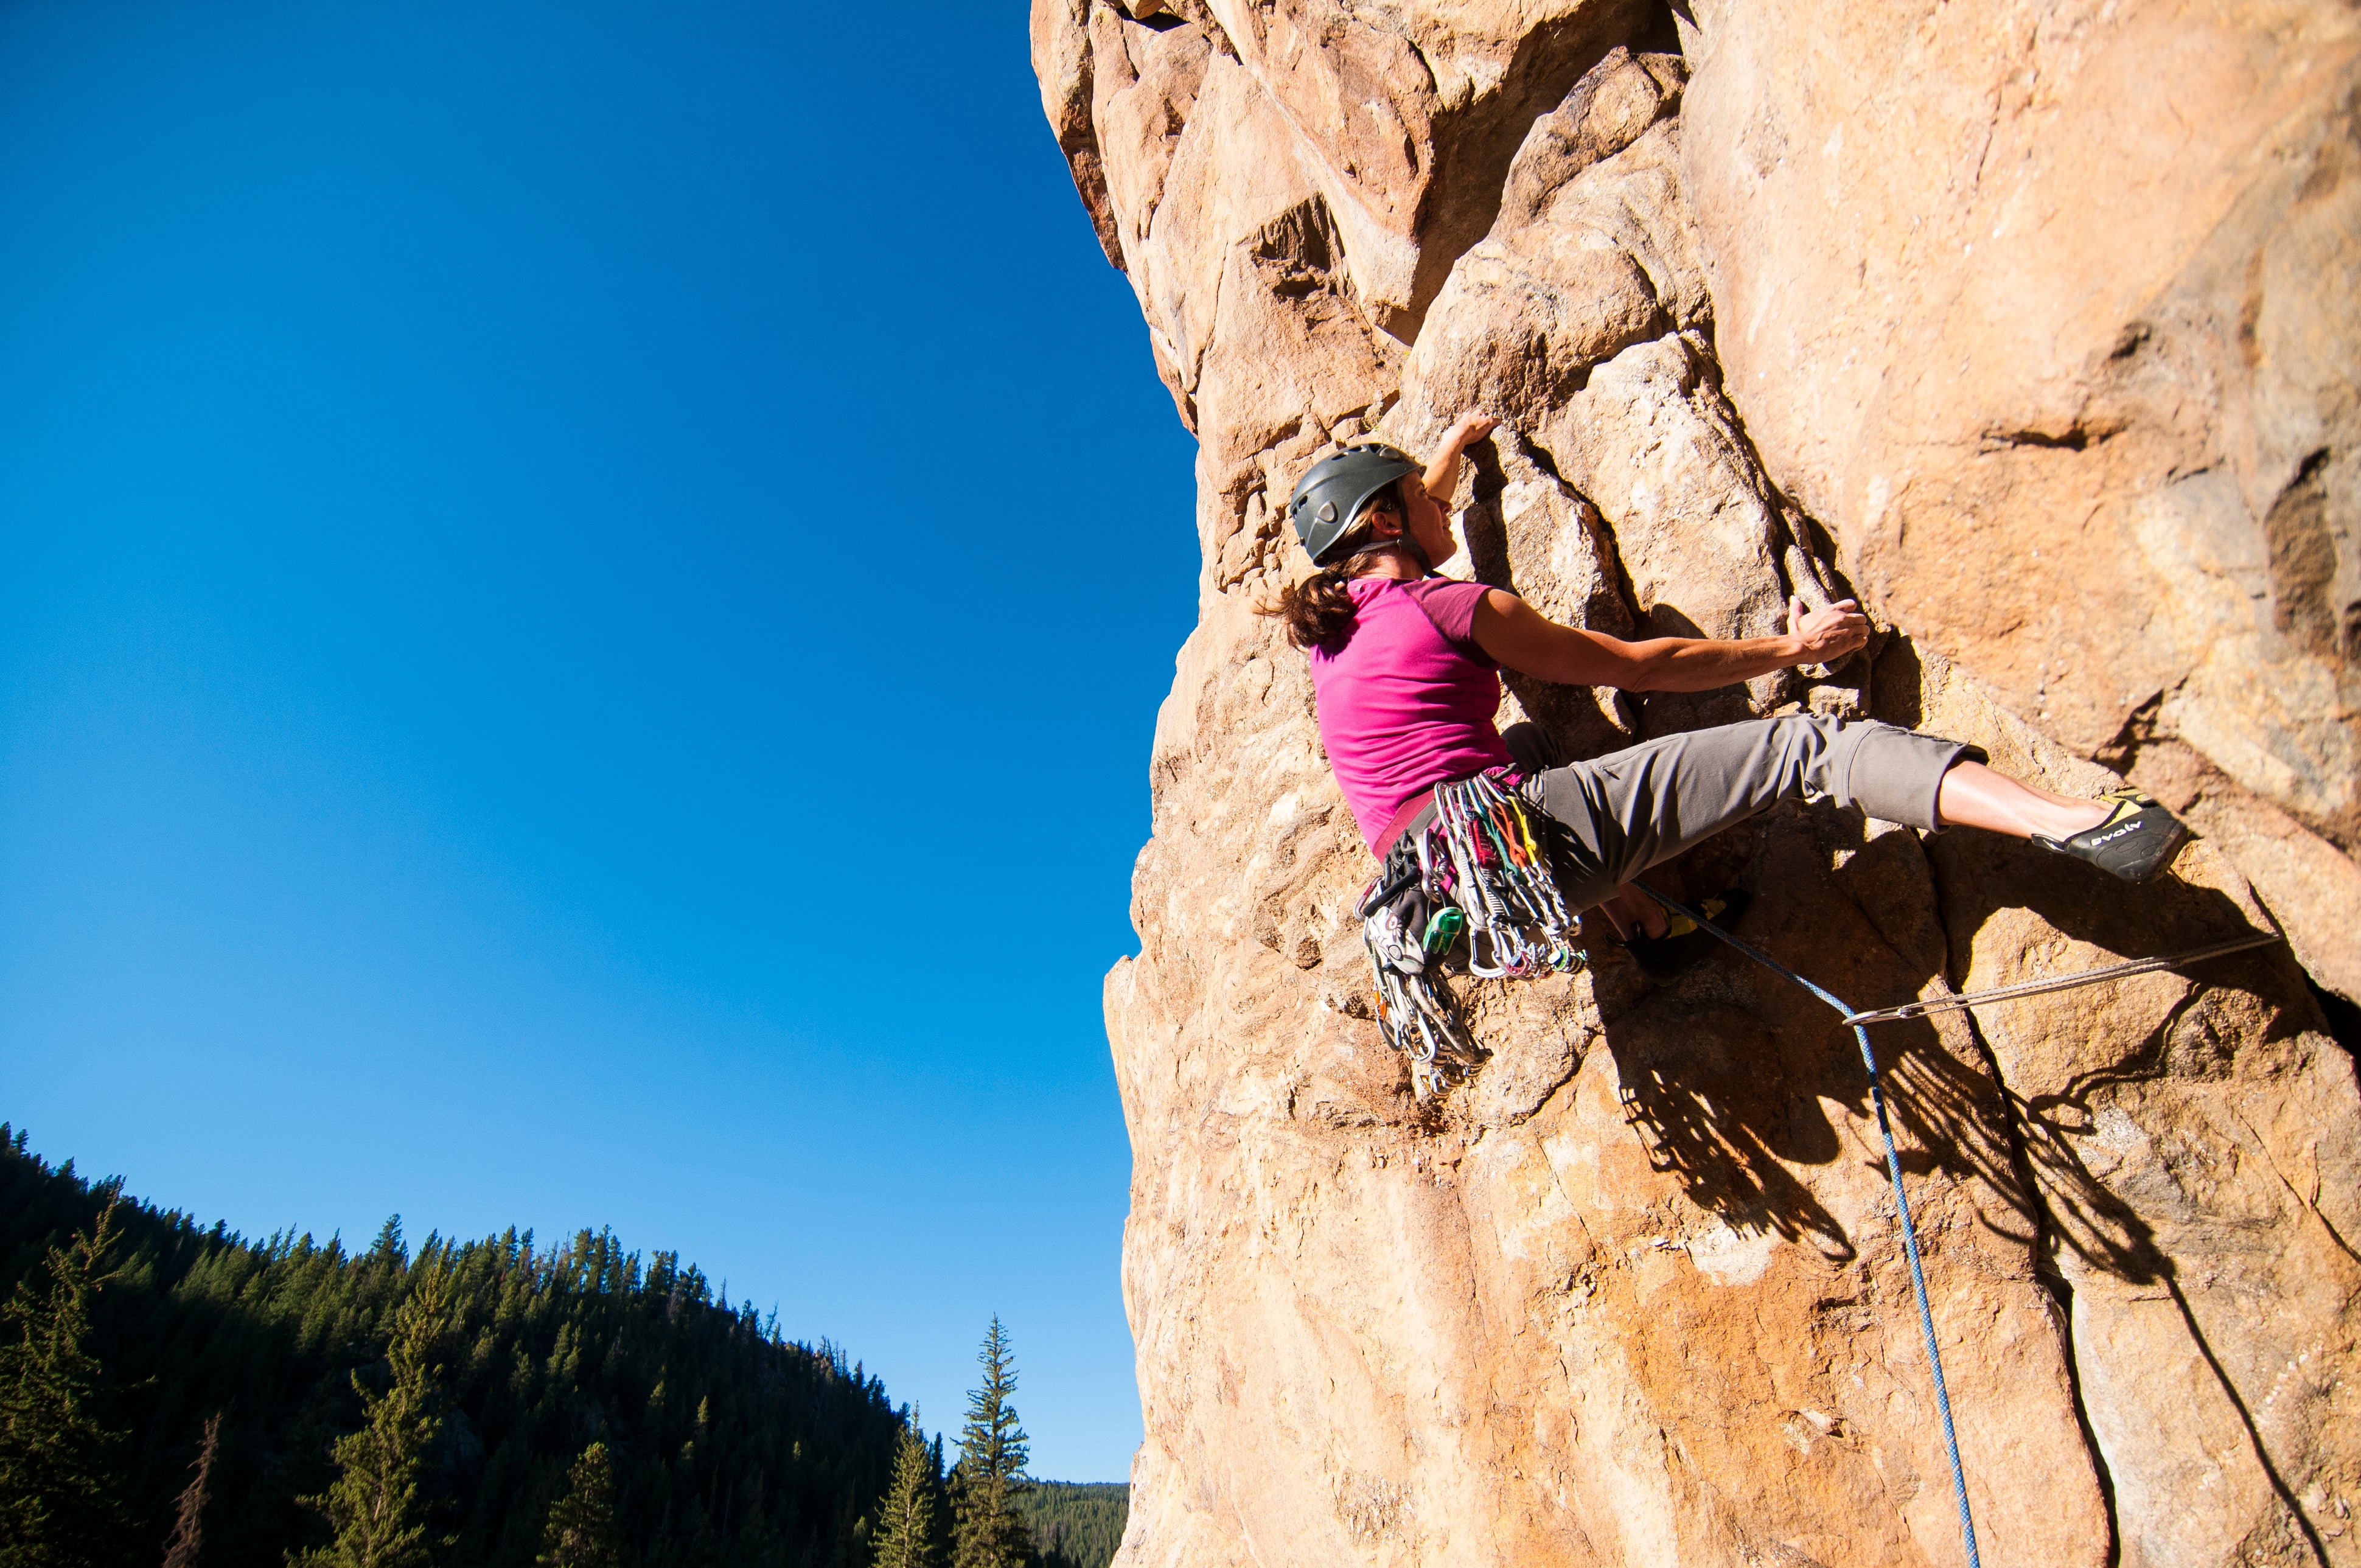 Outstanding rock climbing both on property and nearby, just 5 mins from camp.